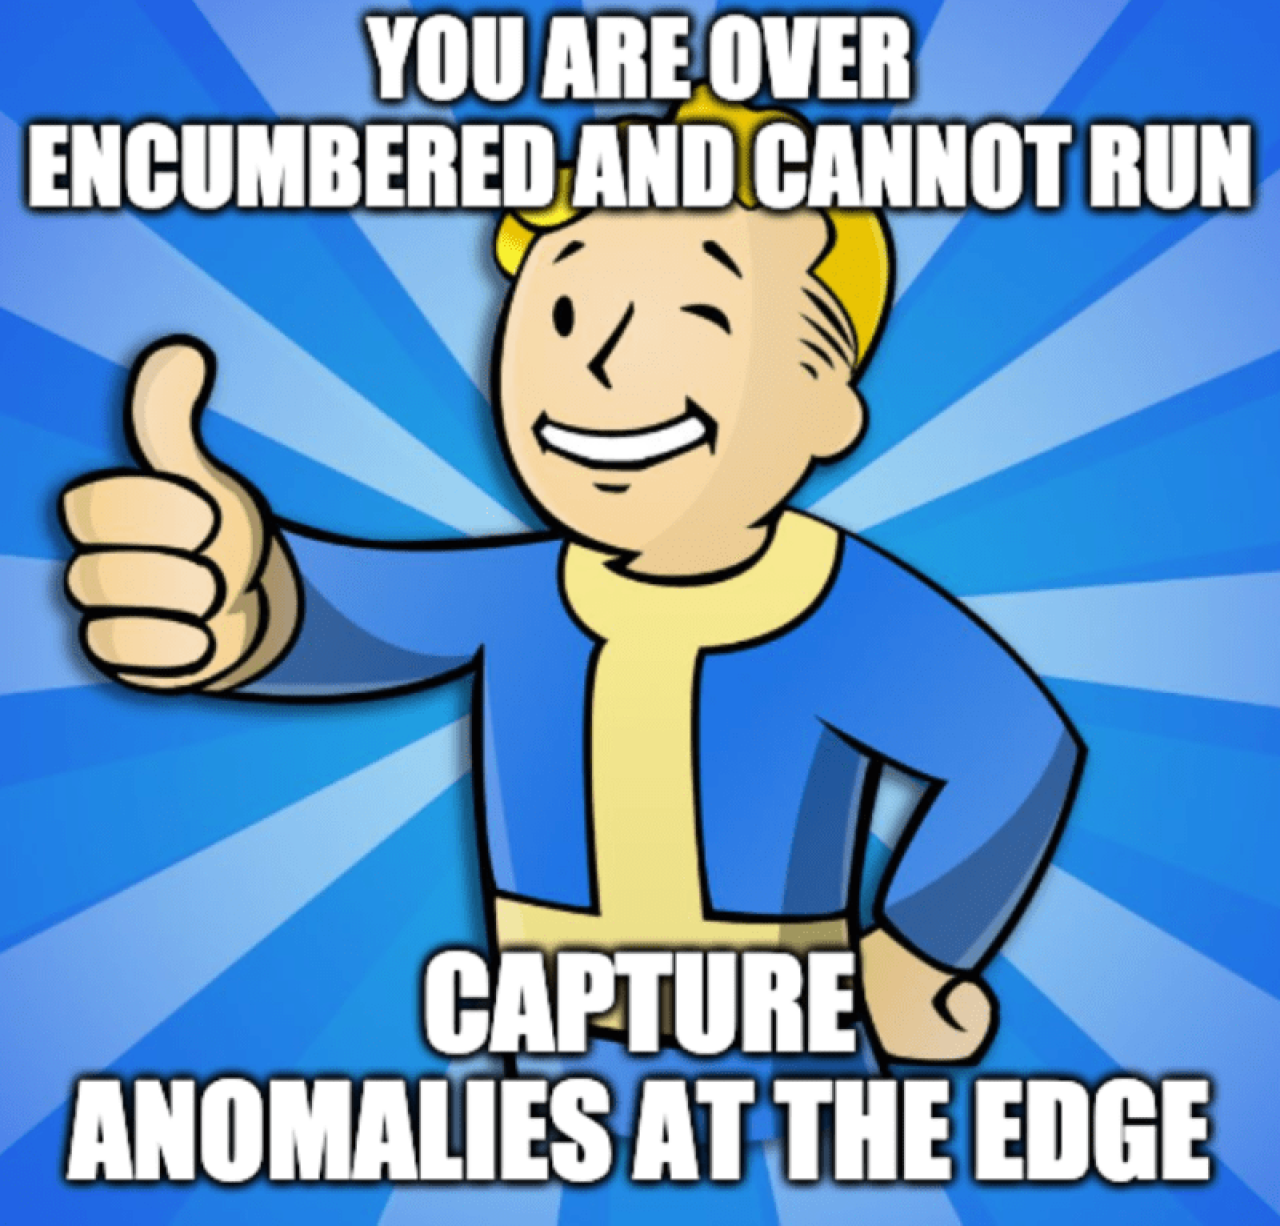 Fallout video game meme: You are over encumbered and cannot run. Capture anomalies at the edge.